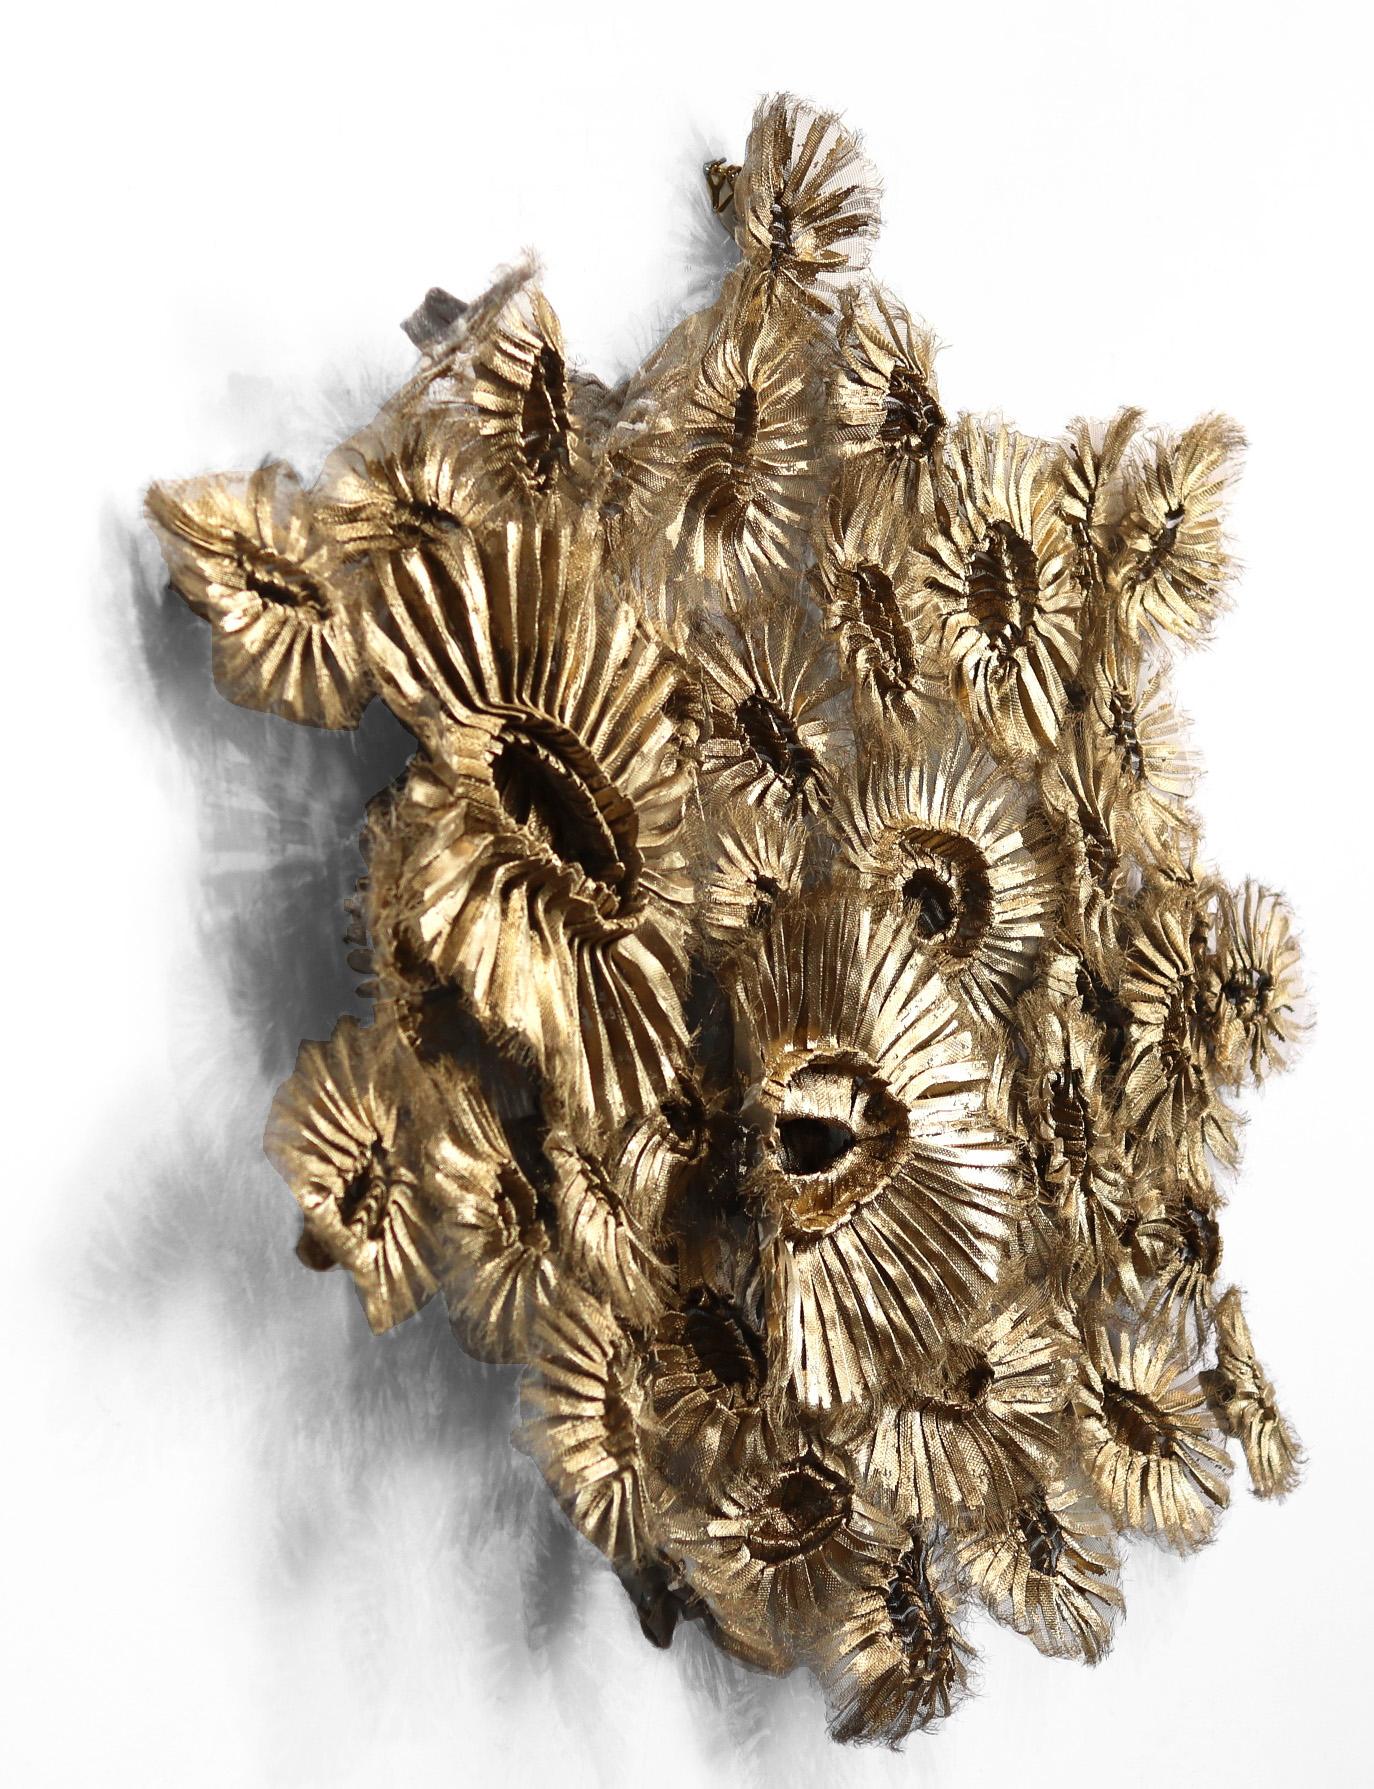 Flora Chanel Gilded  - Large Three-Dimensional Wall Art - Contemporary Mixed Media Art by Atticus Adams